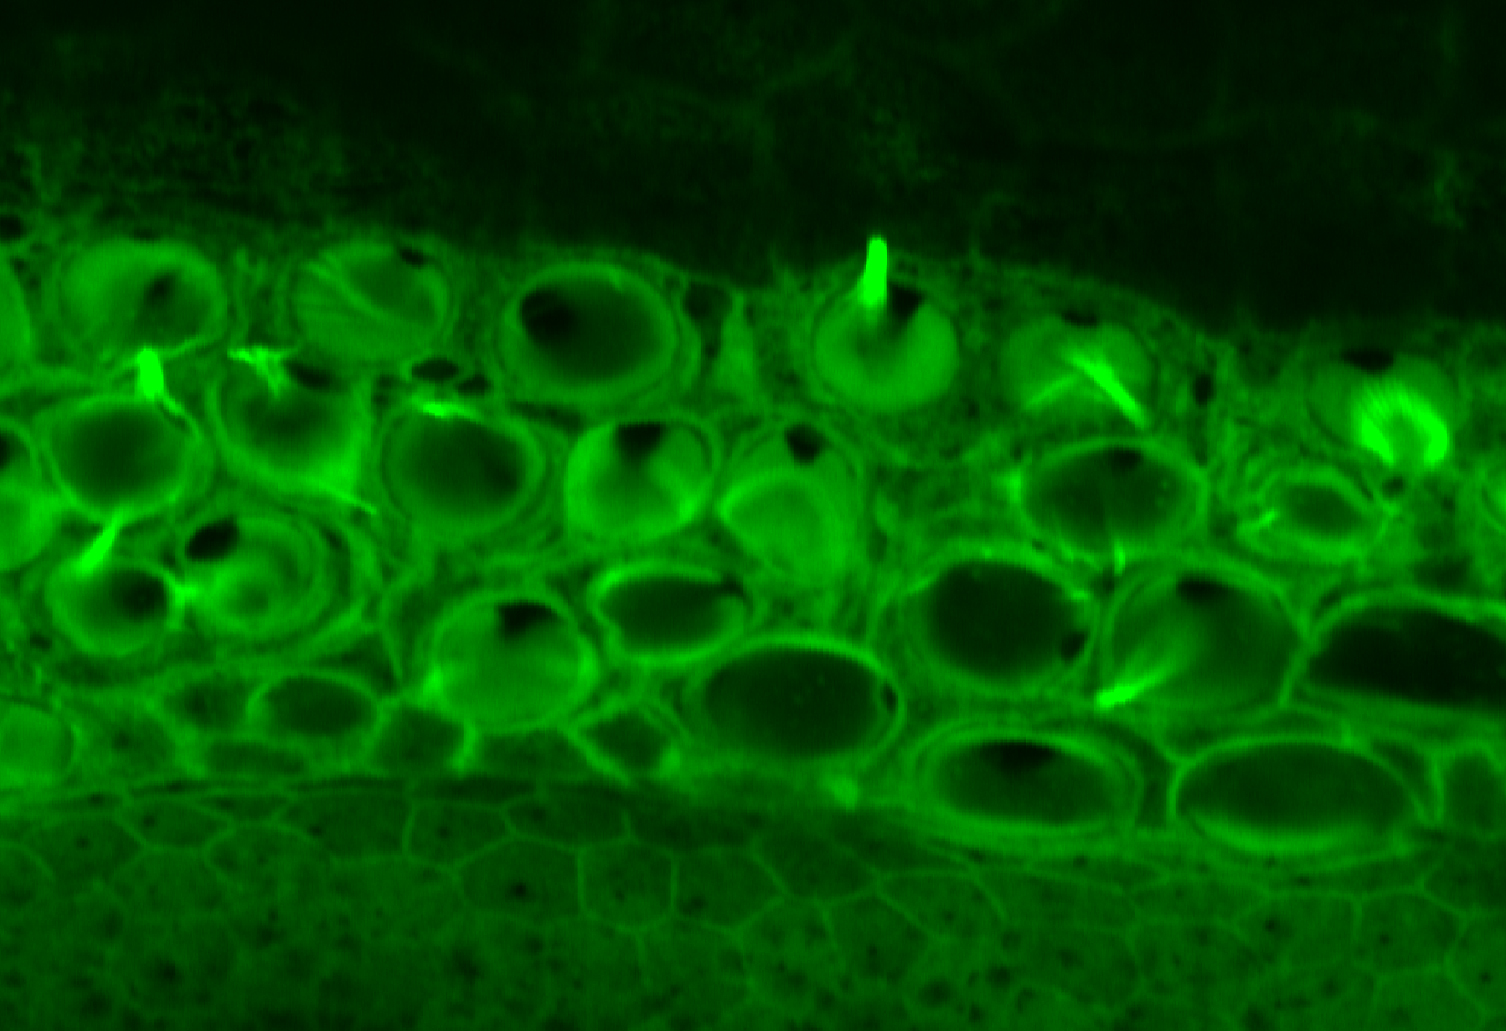 Image of cells scans from mouse inner ear